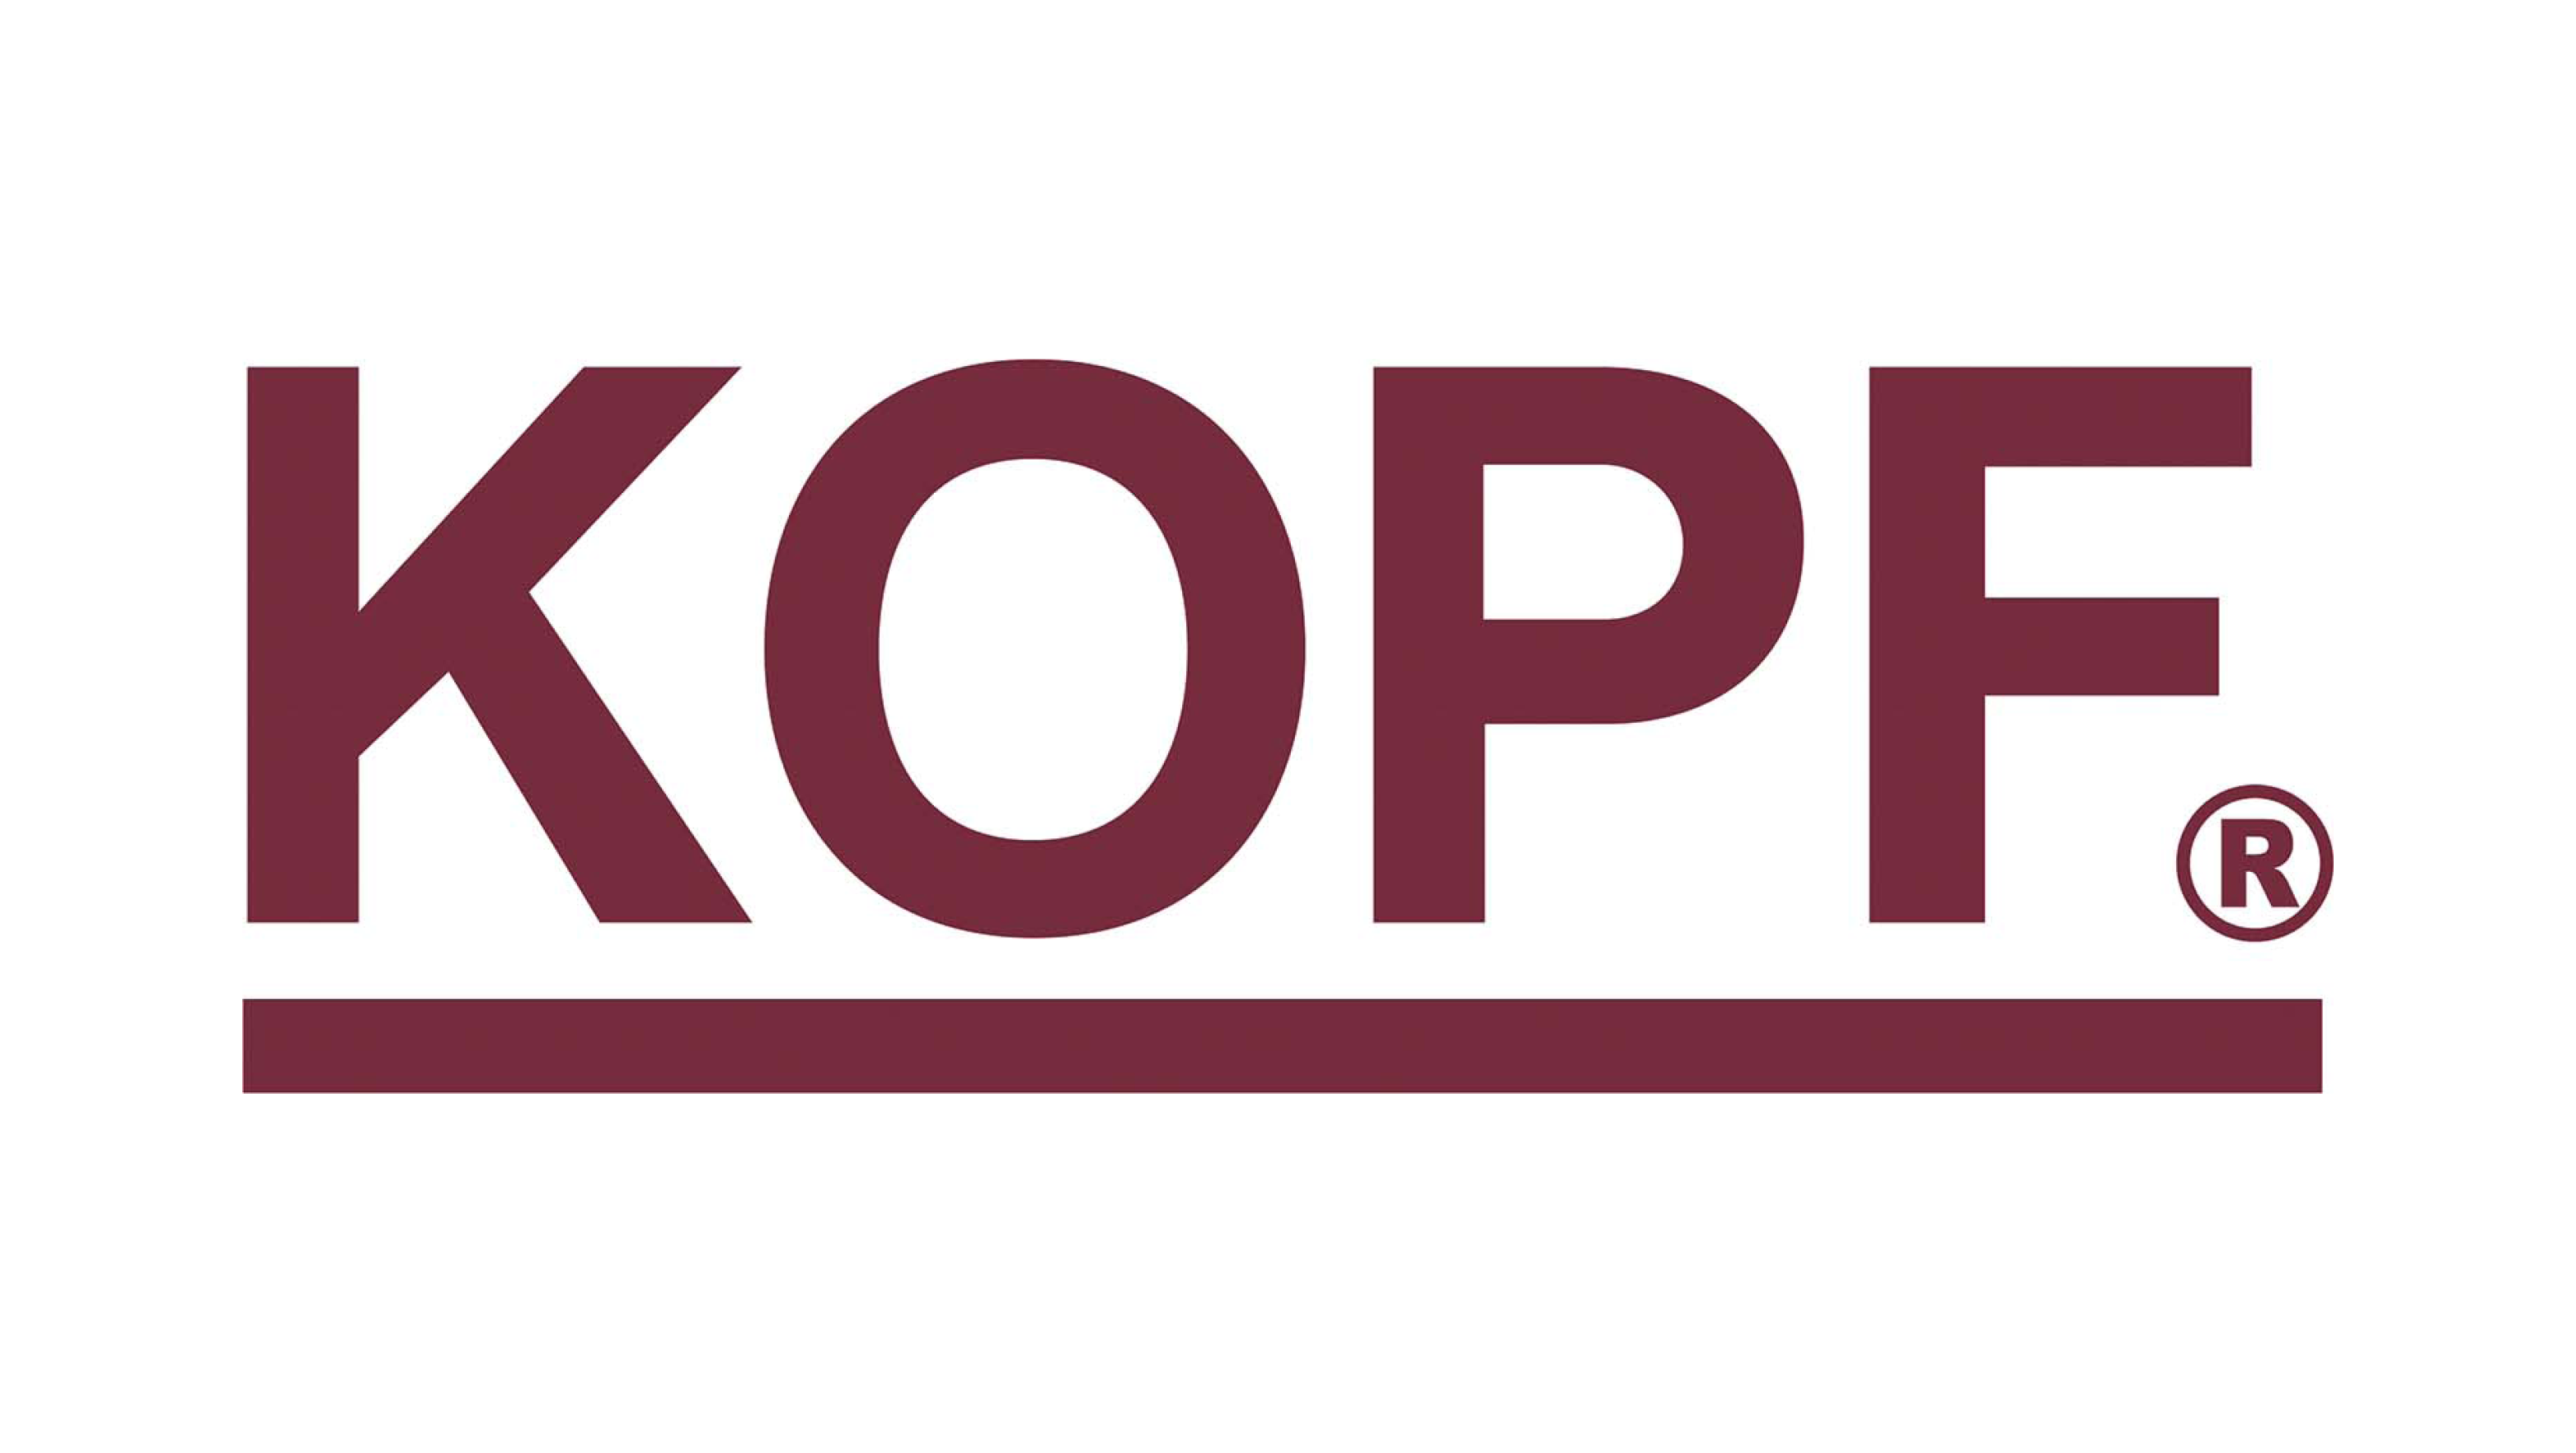 David Kopf Instruments is a Lecture and Event sponsor of Neuroscience 2023.